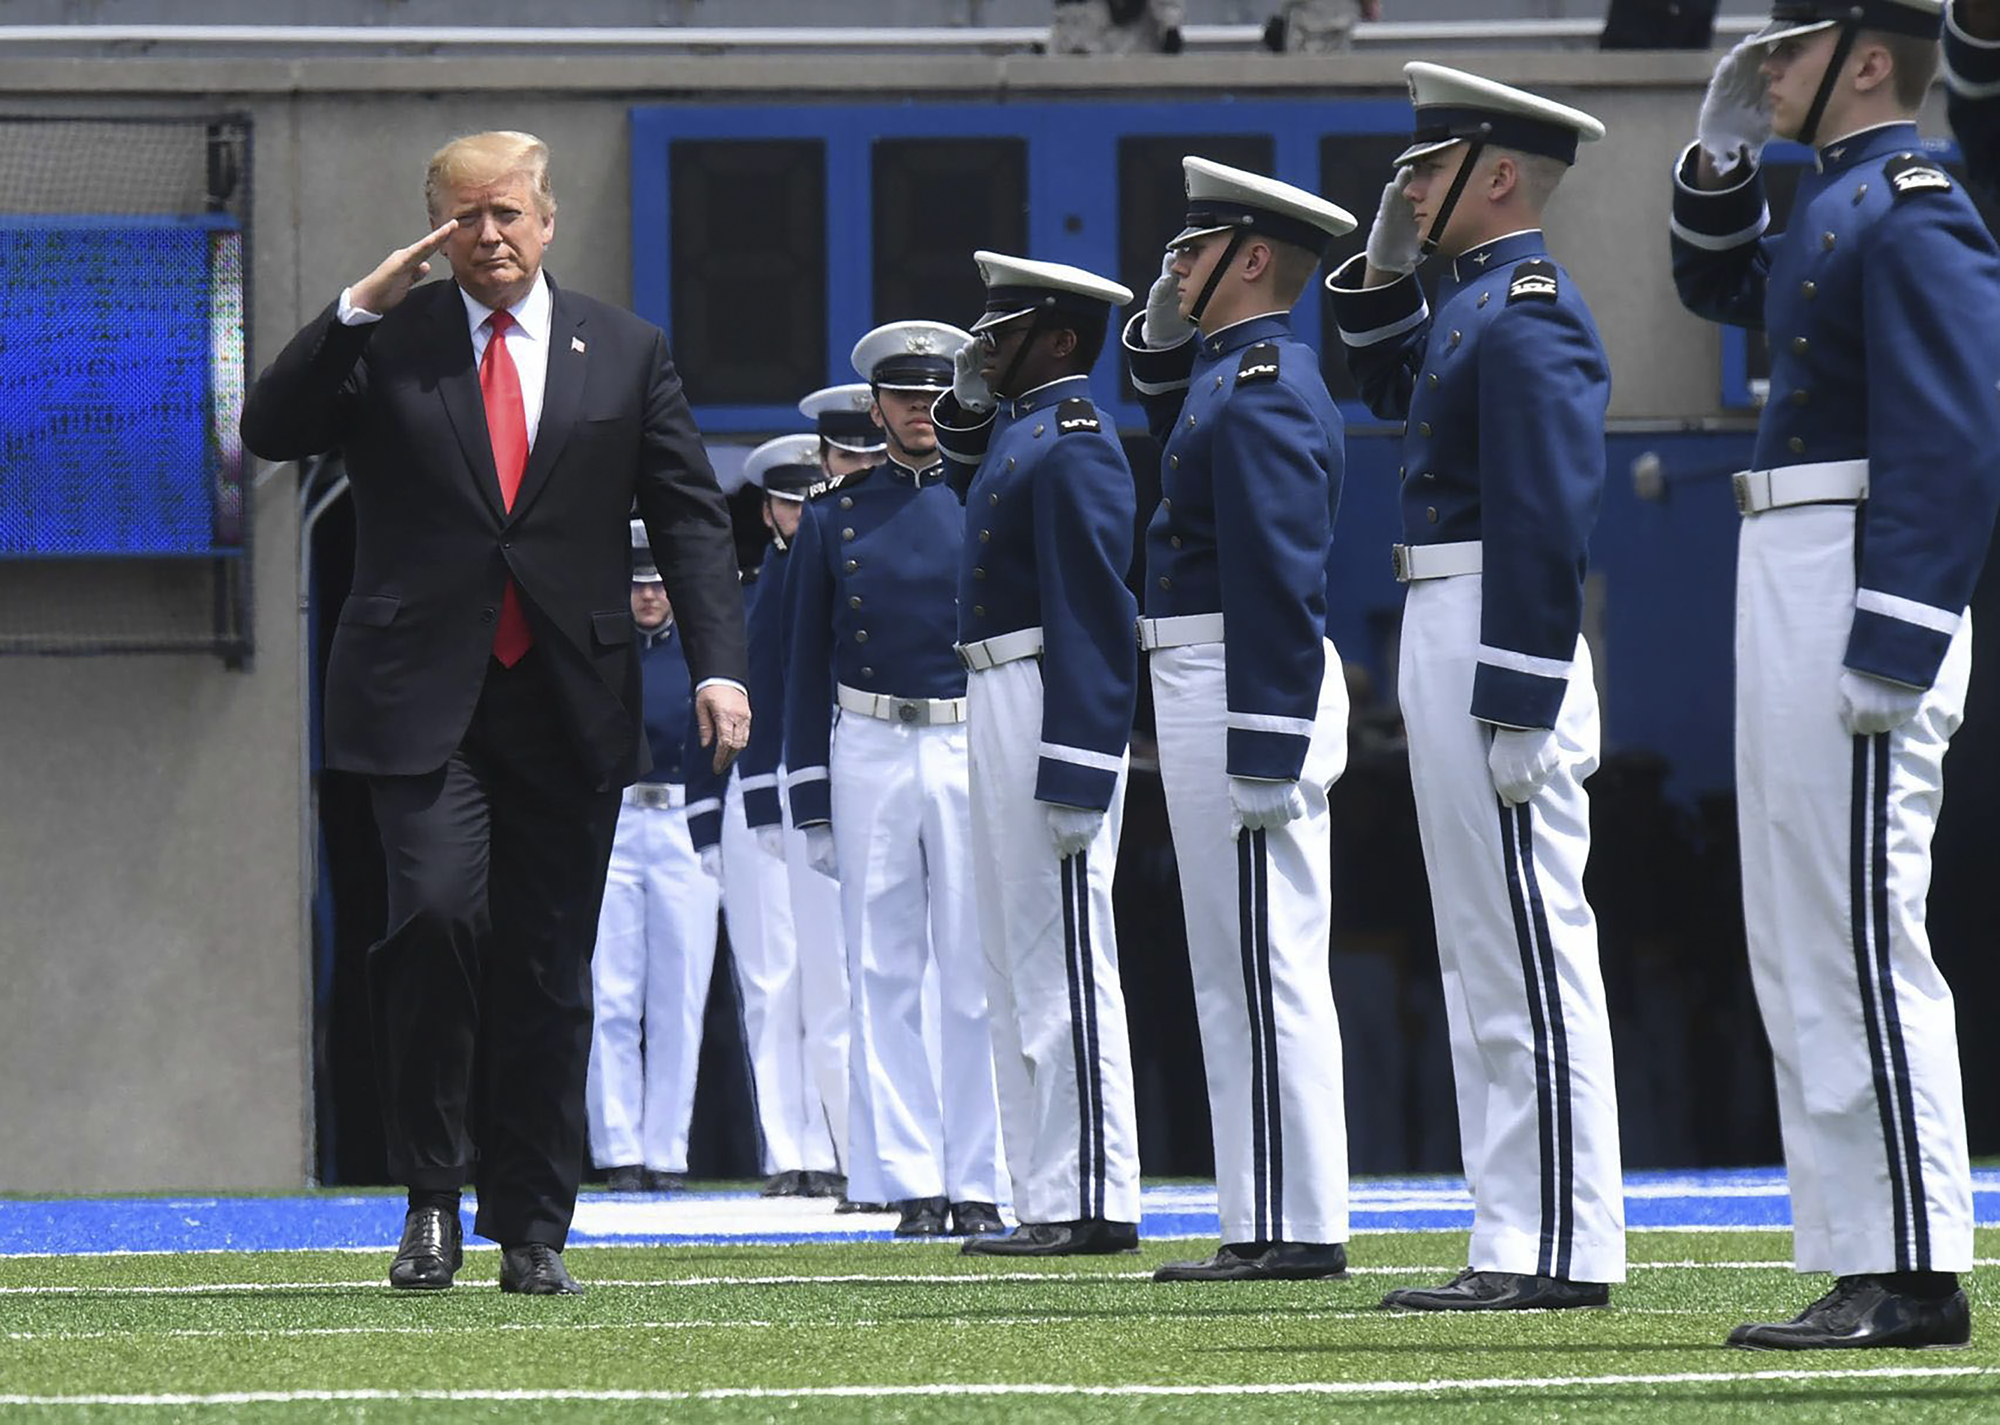 President Donald Trump walks along a line of Air Force Academy cadets.